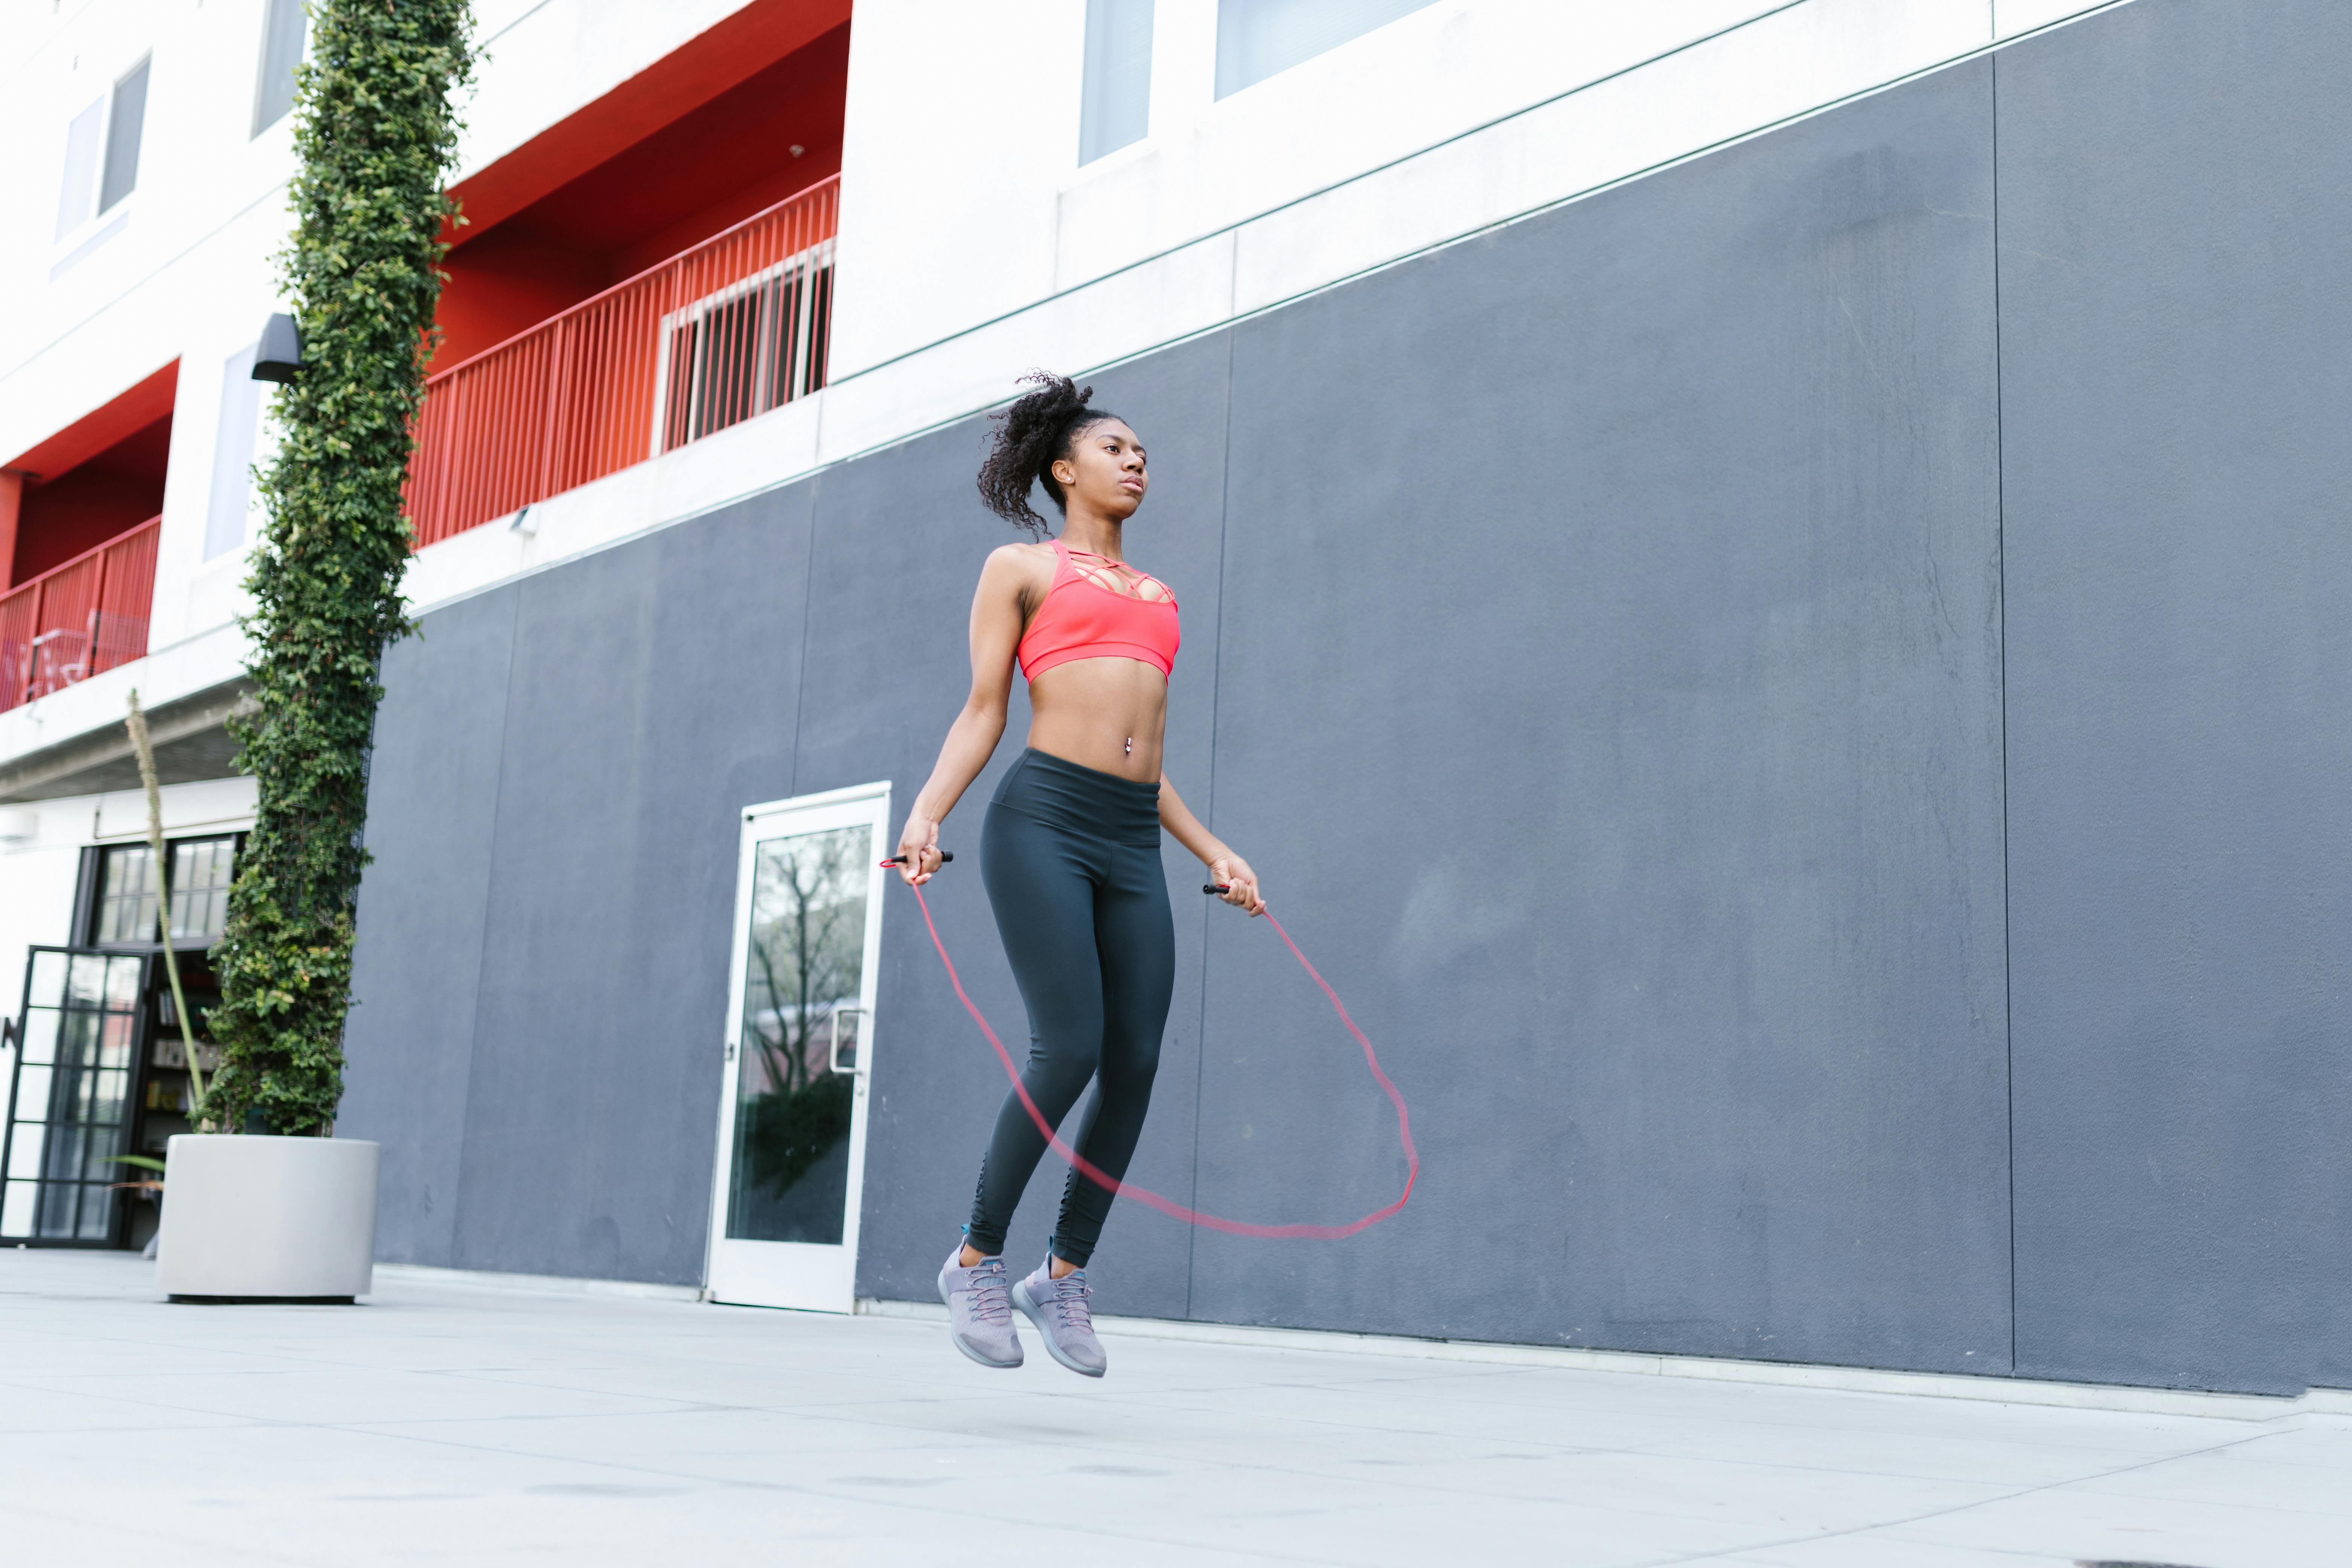 Woman Wearing a Sports Bra and Leggings Skipping Rope · Free Stock